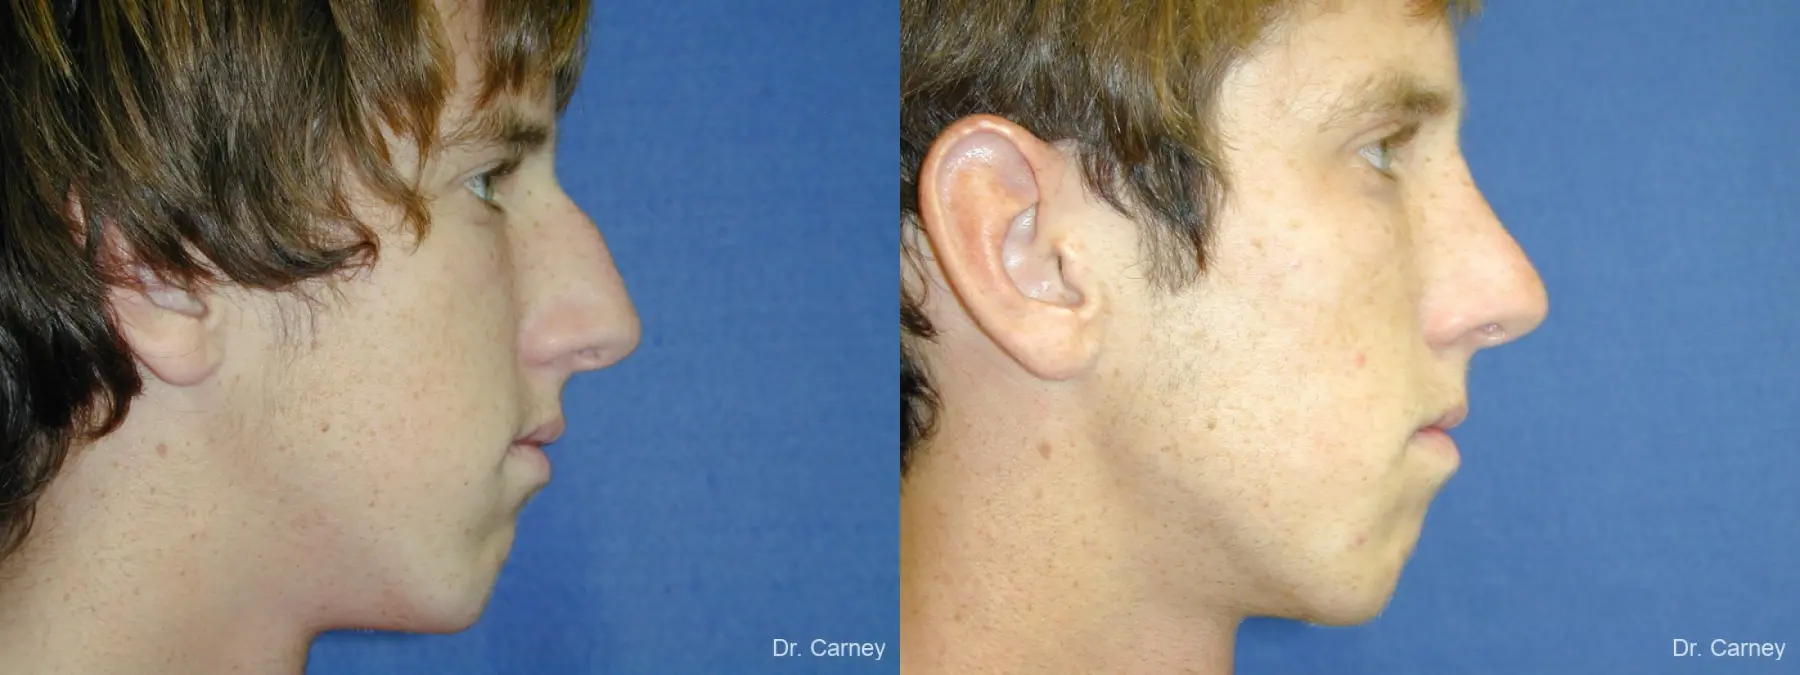 Virginia Beach Rhinoplasty 1219 - Before and After